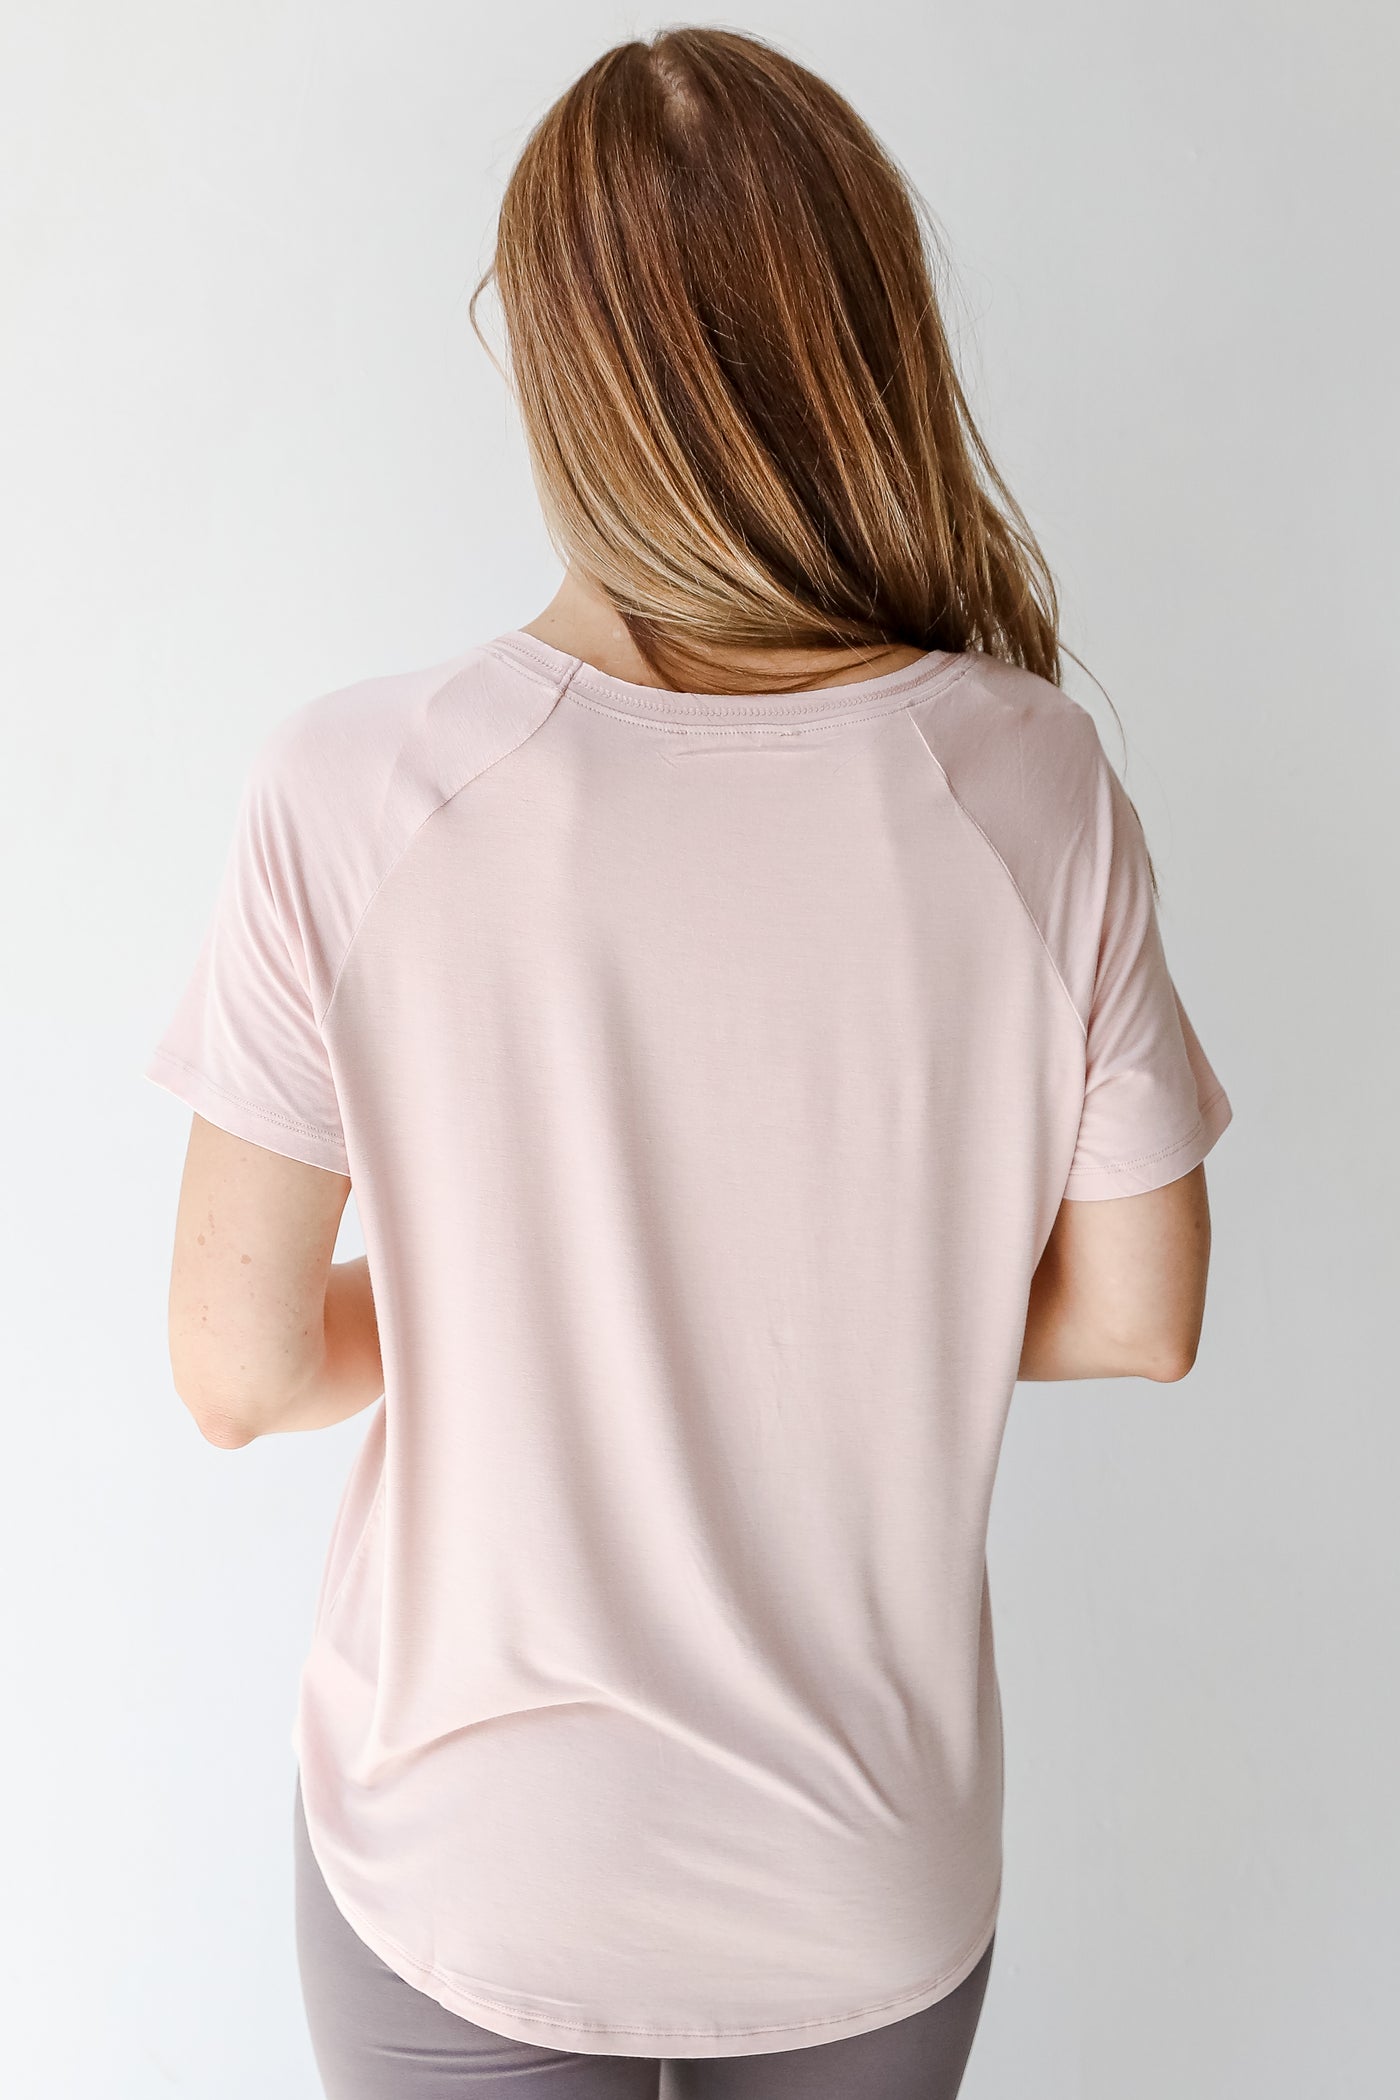 Everyday Tee in blush back view